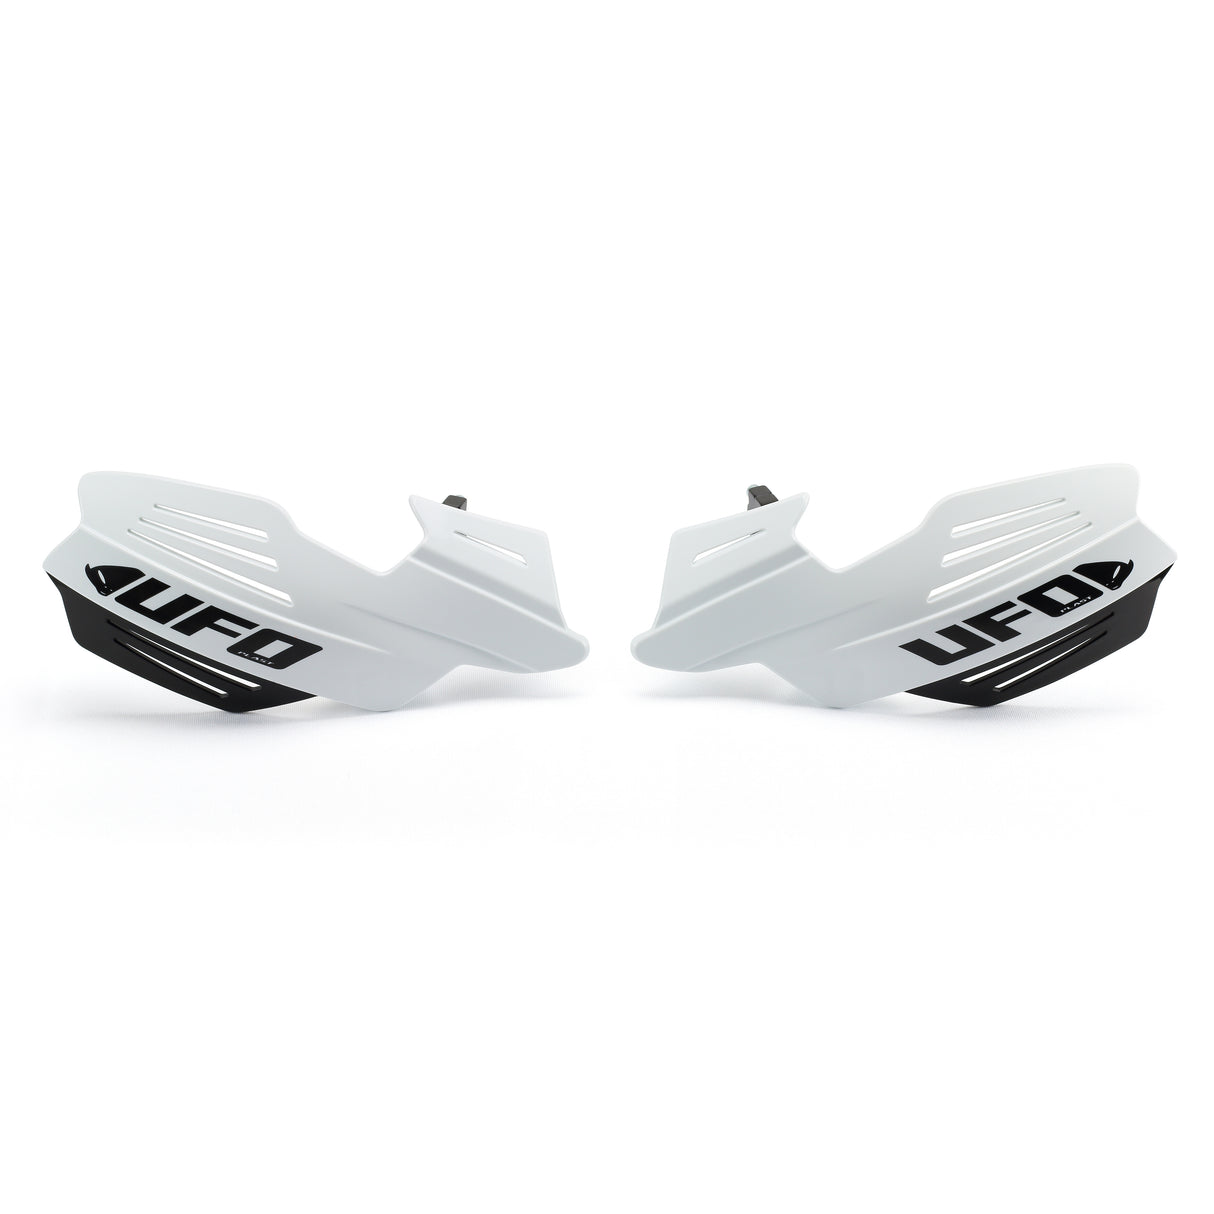 UFO Vulcan Handguards (White) Mounting Kit Included